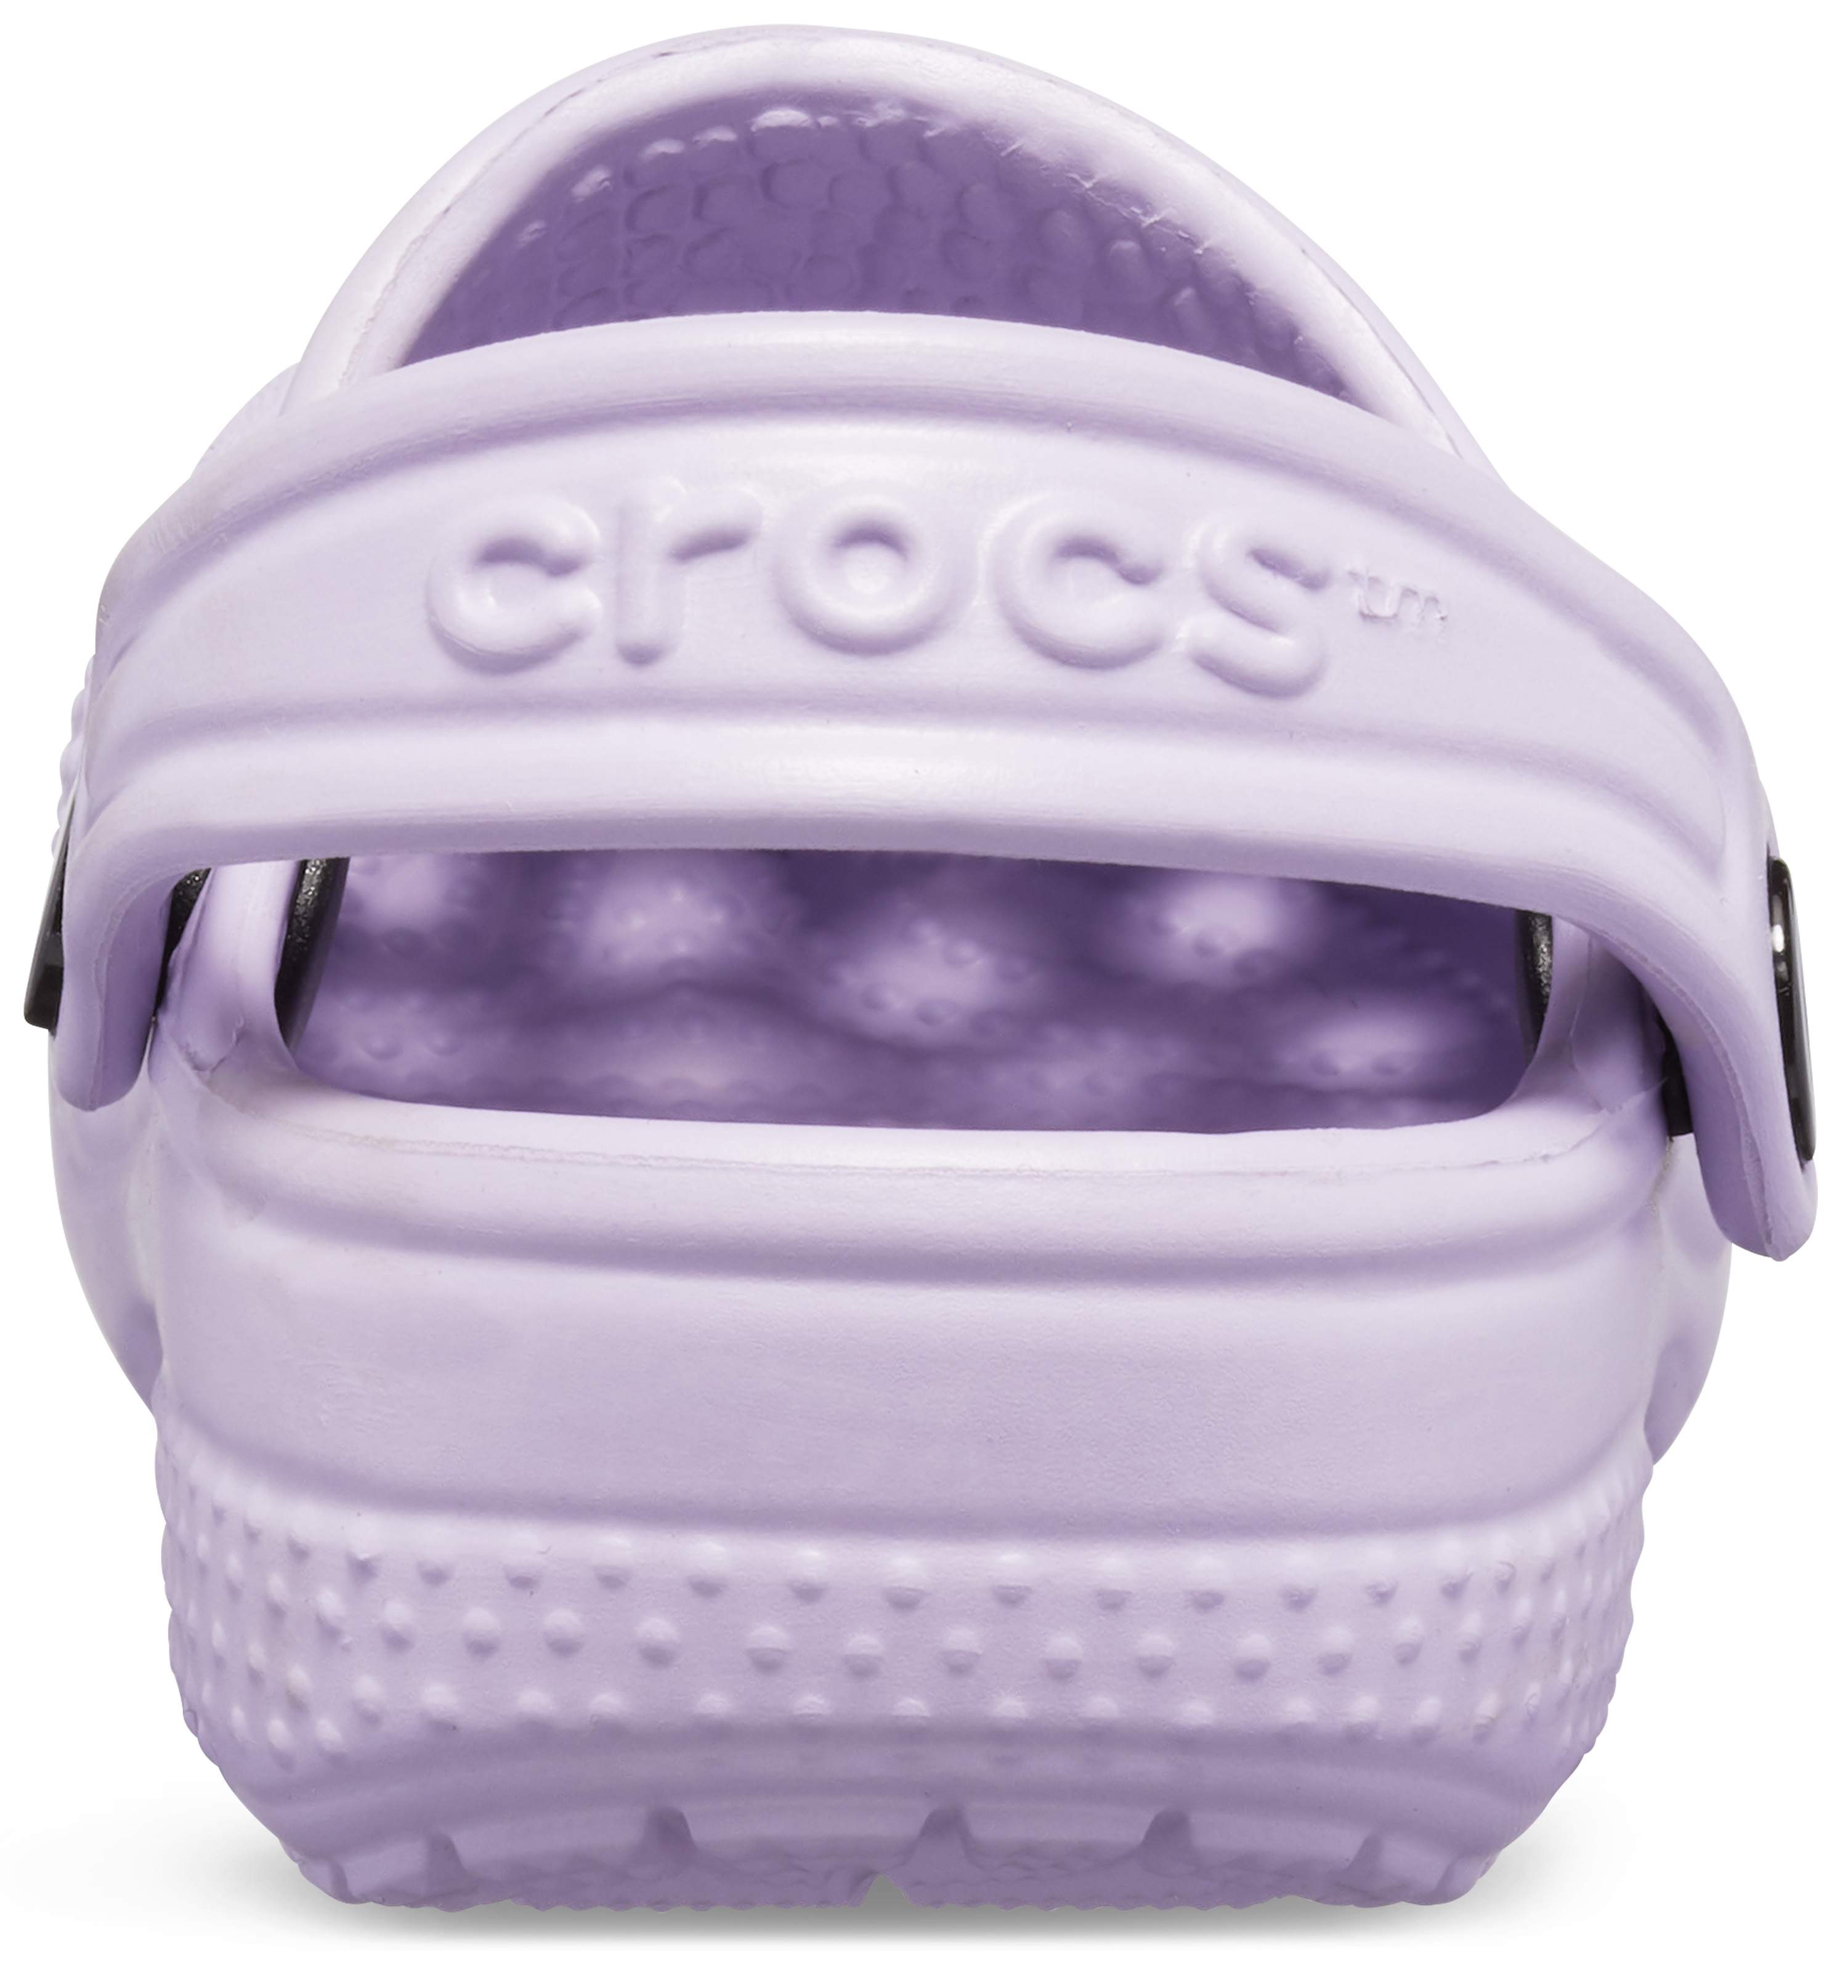 crocs for 18 month old